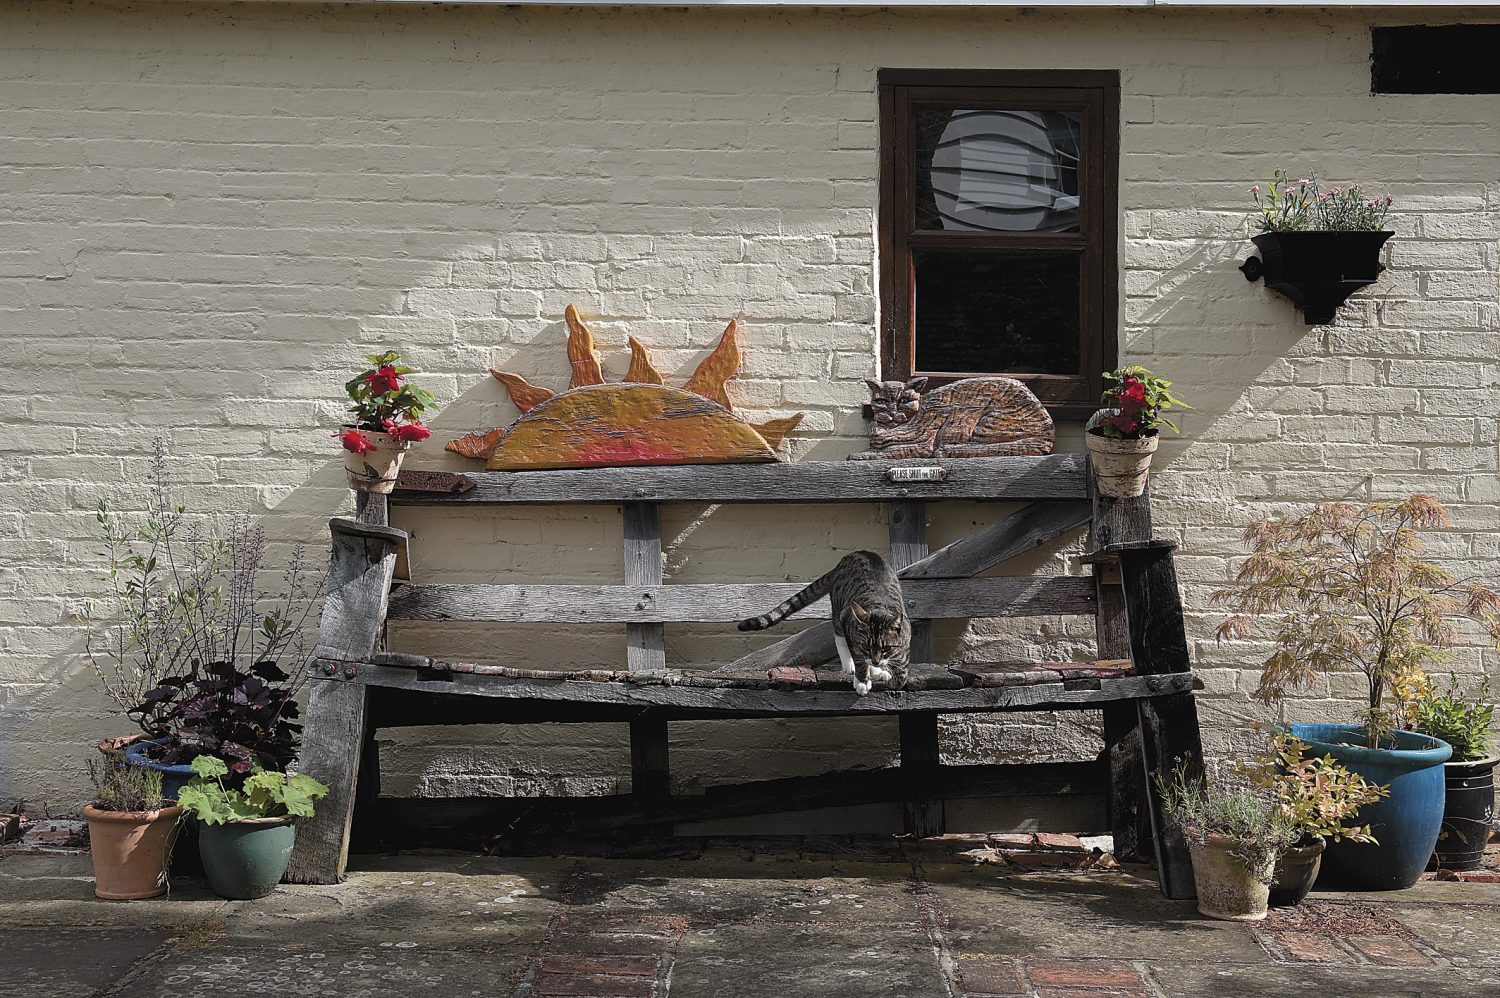 Lucy Williams’ stunning bench hints at the artistic treasures inside the house. This is a real talking point for visitors and a blissful seat for a cat, when there is no one else about!